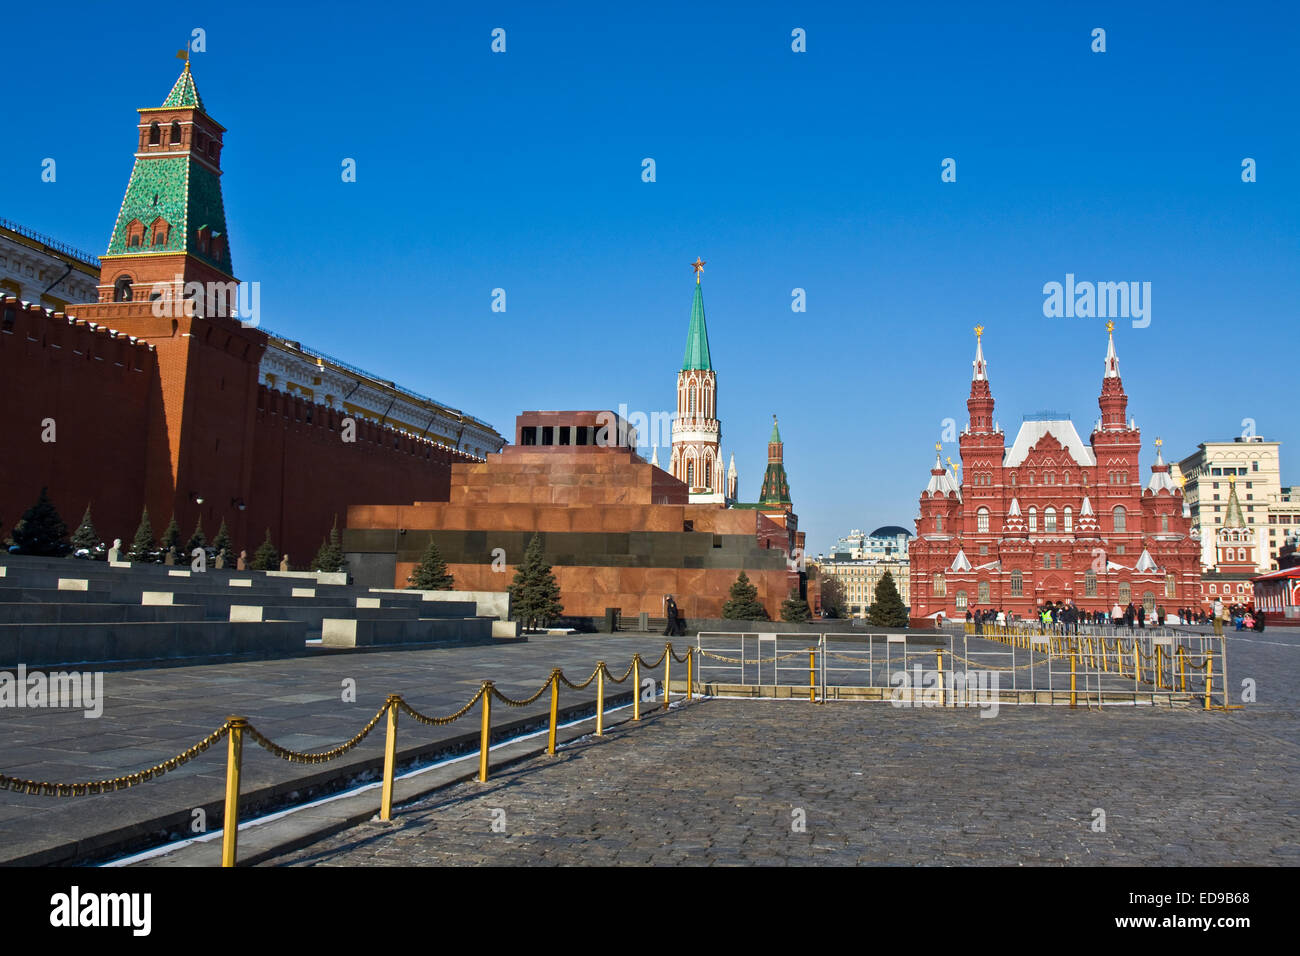 Moscow, Russia - March 10, 2012: Red square, Kremlin, Lenin's mausoleum and Historical museum. Stock Photo